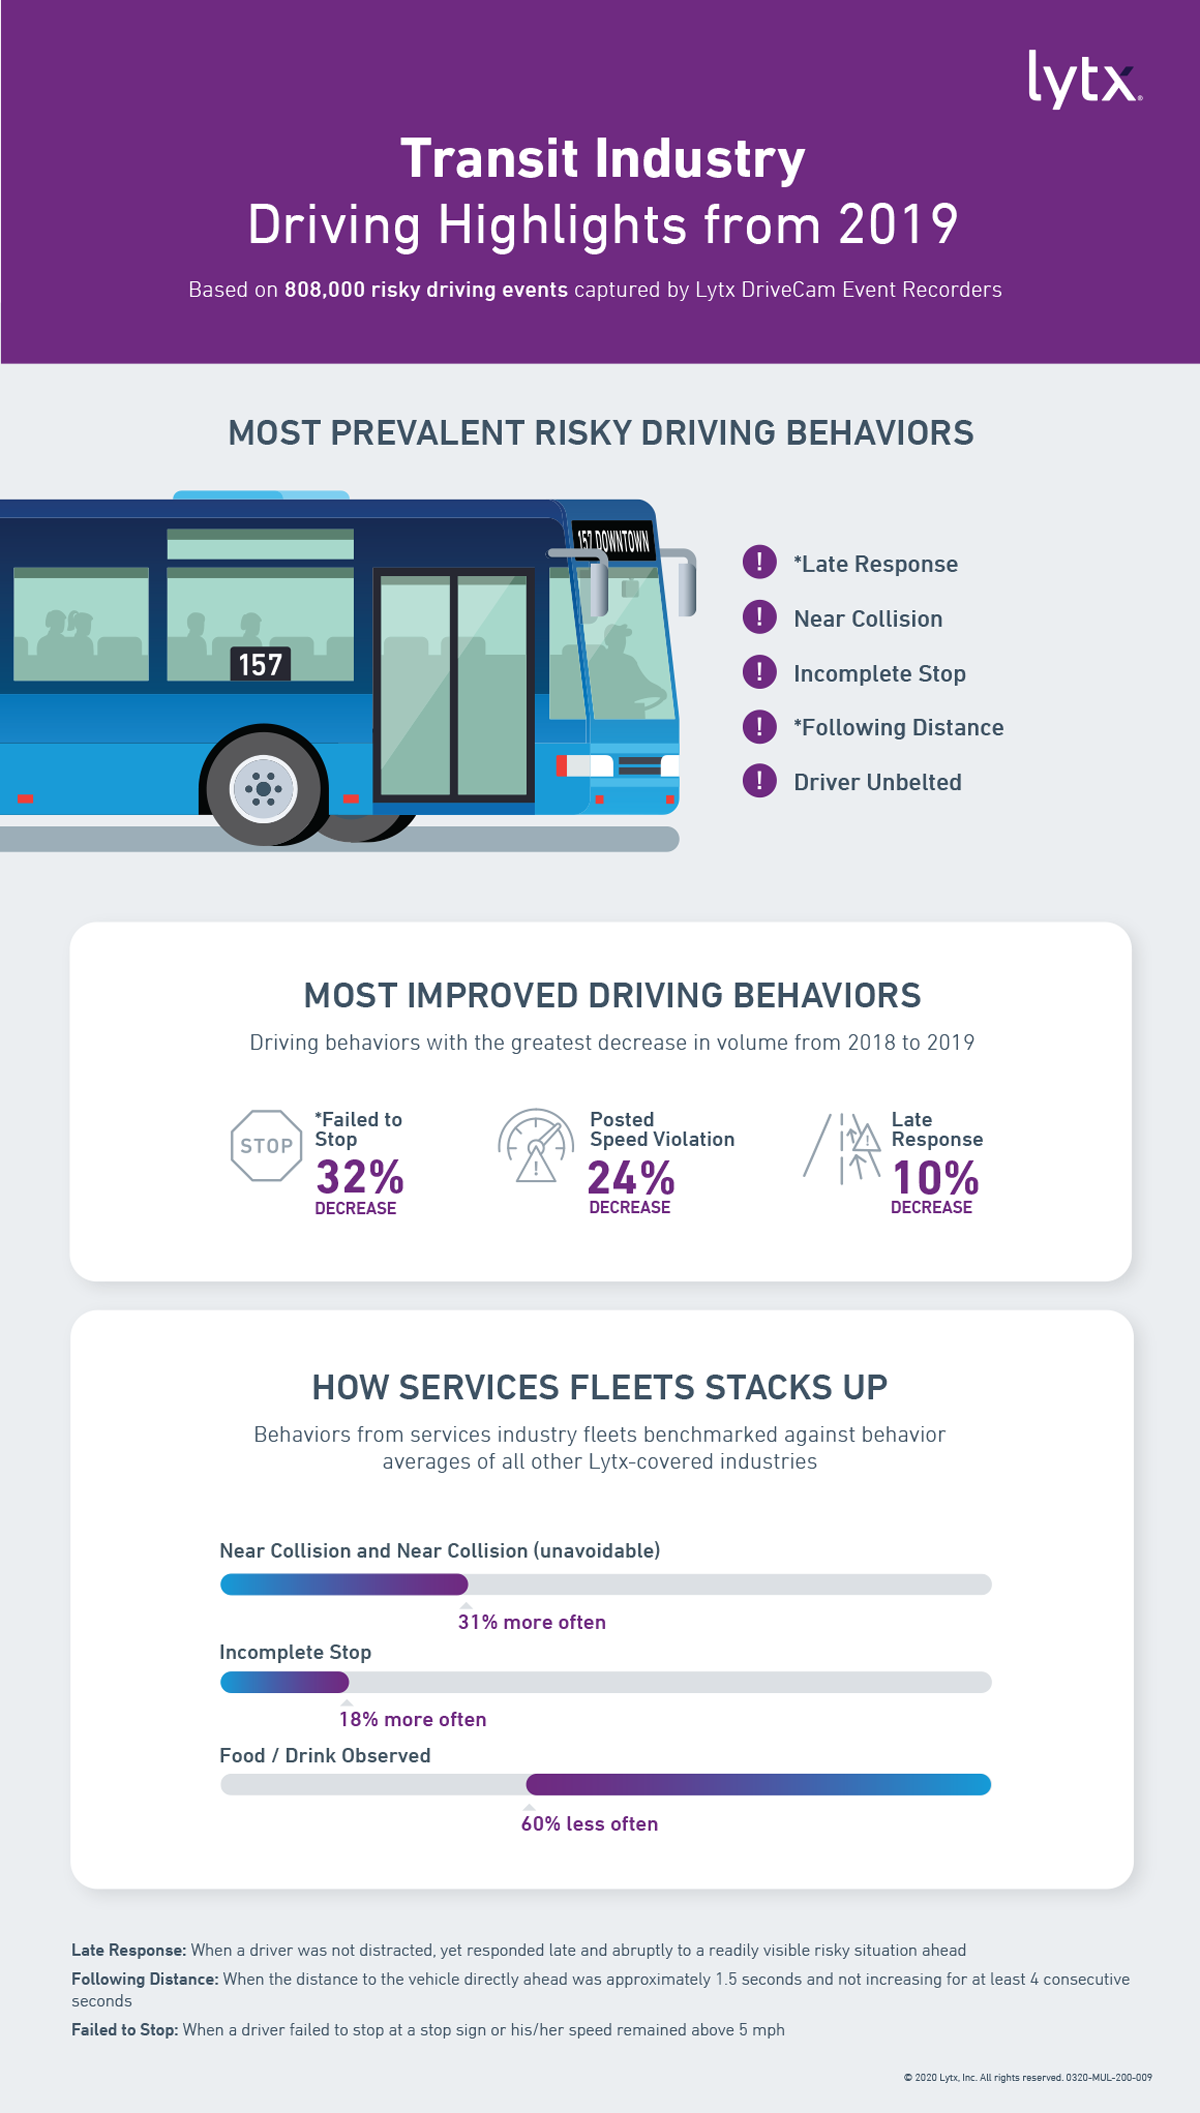 Transit industry driving highlights from 2019